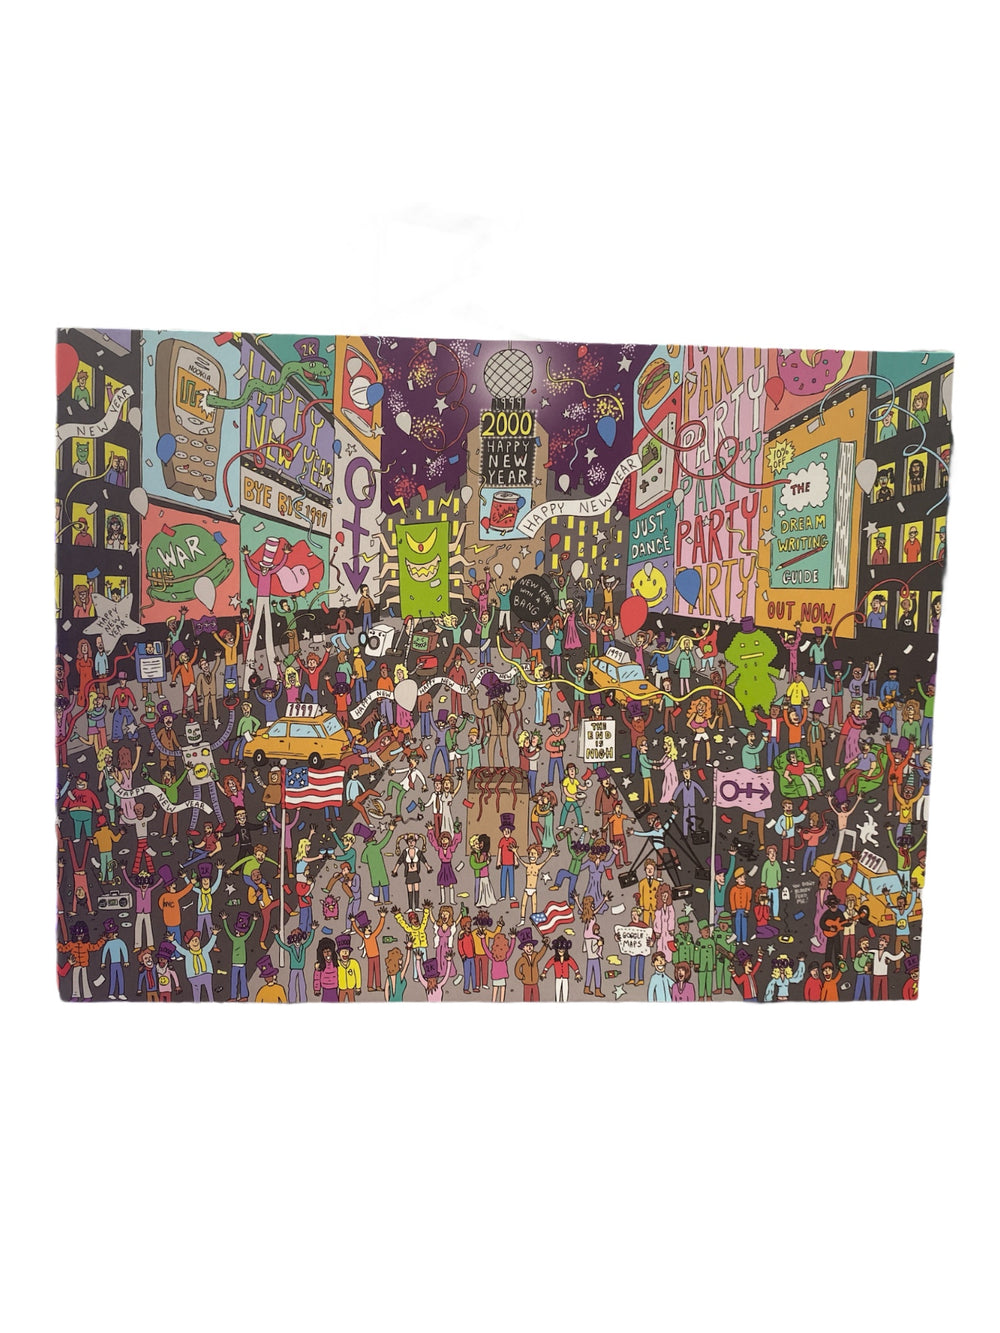 Prince –  Where's Prince? Prince in 1999 : 500 Piece Jigsaw Puzzle Boxed NEW